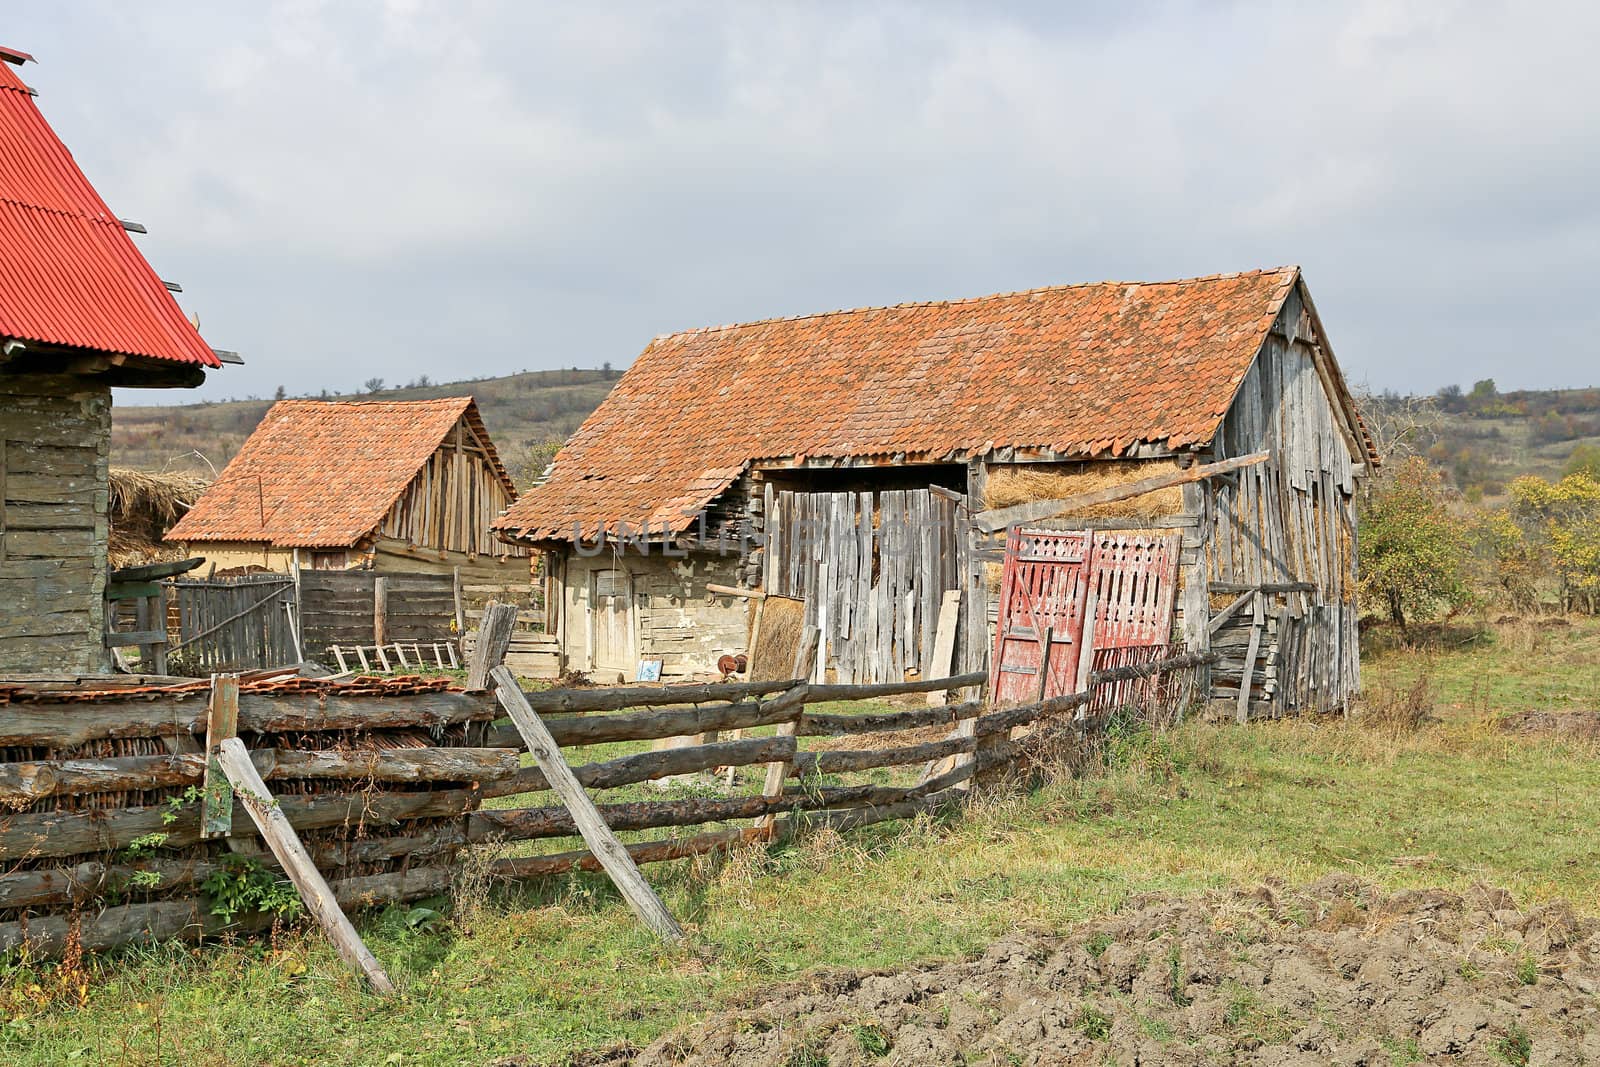 Detail of some farm buildings in the country